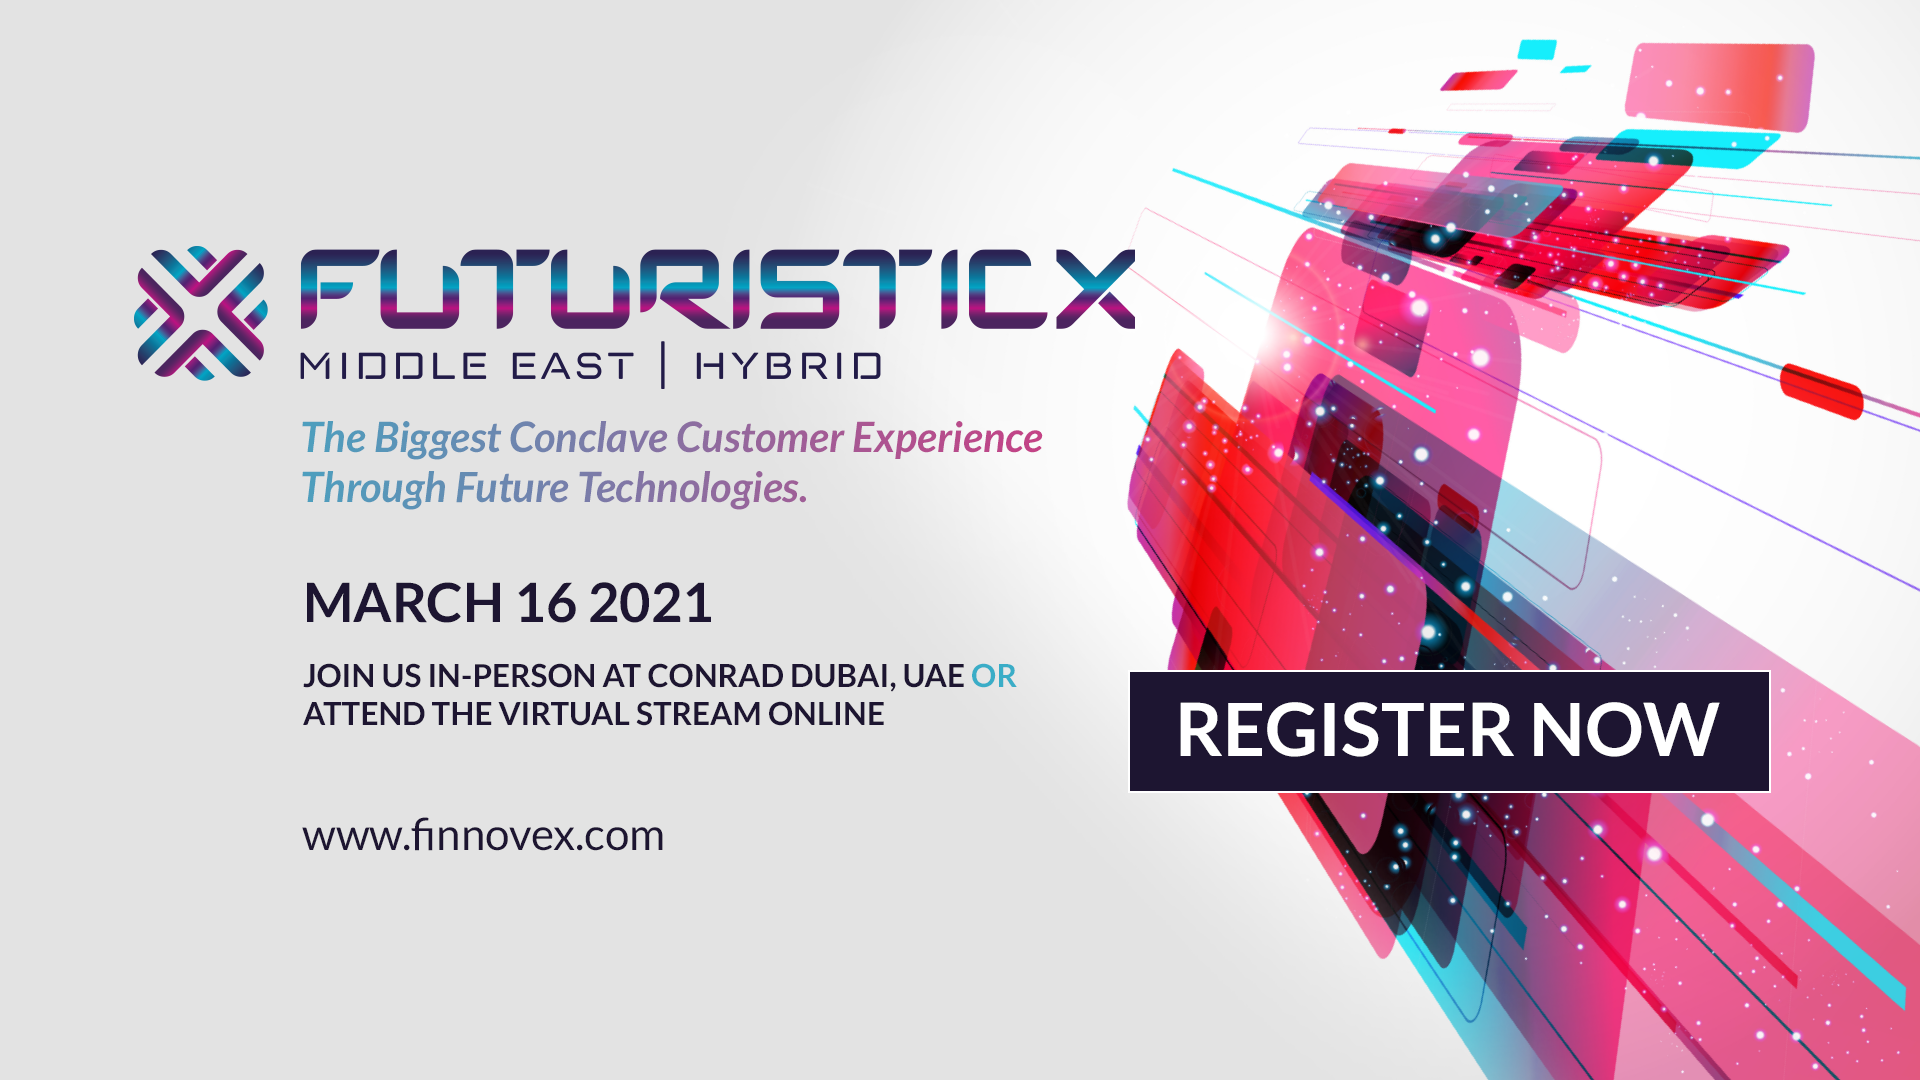 futuristicx-hybrid-conclave-driving-customer-experience-through-technologies